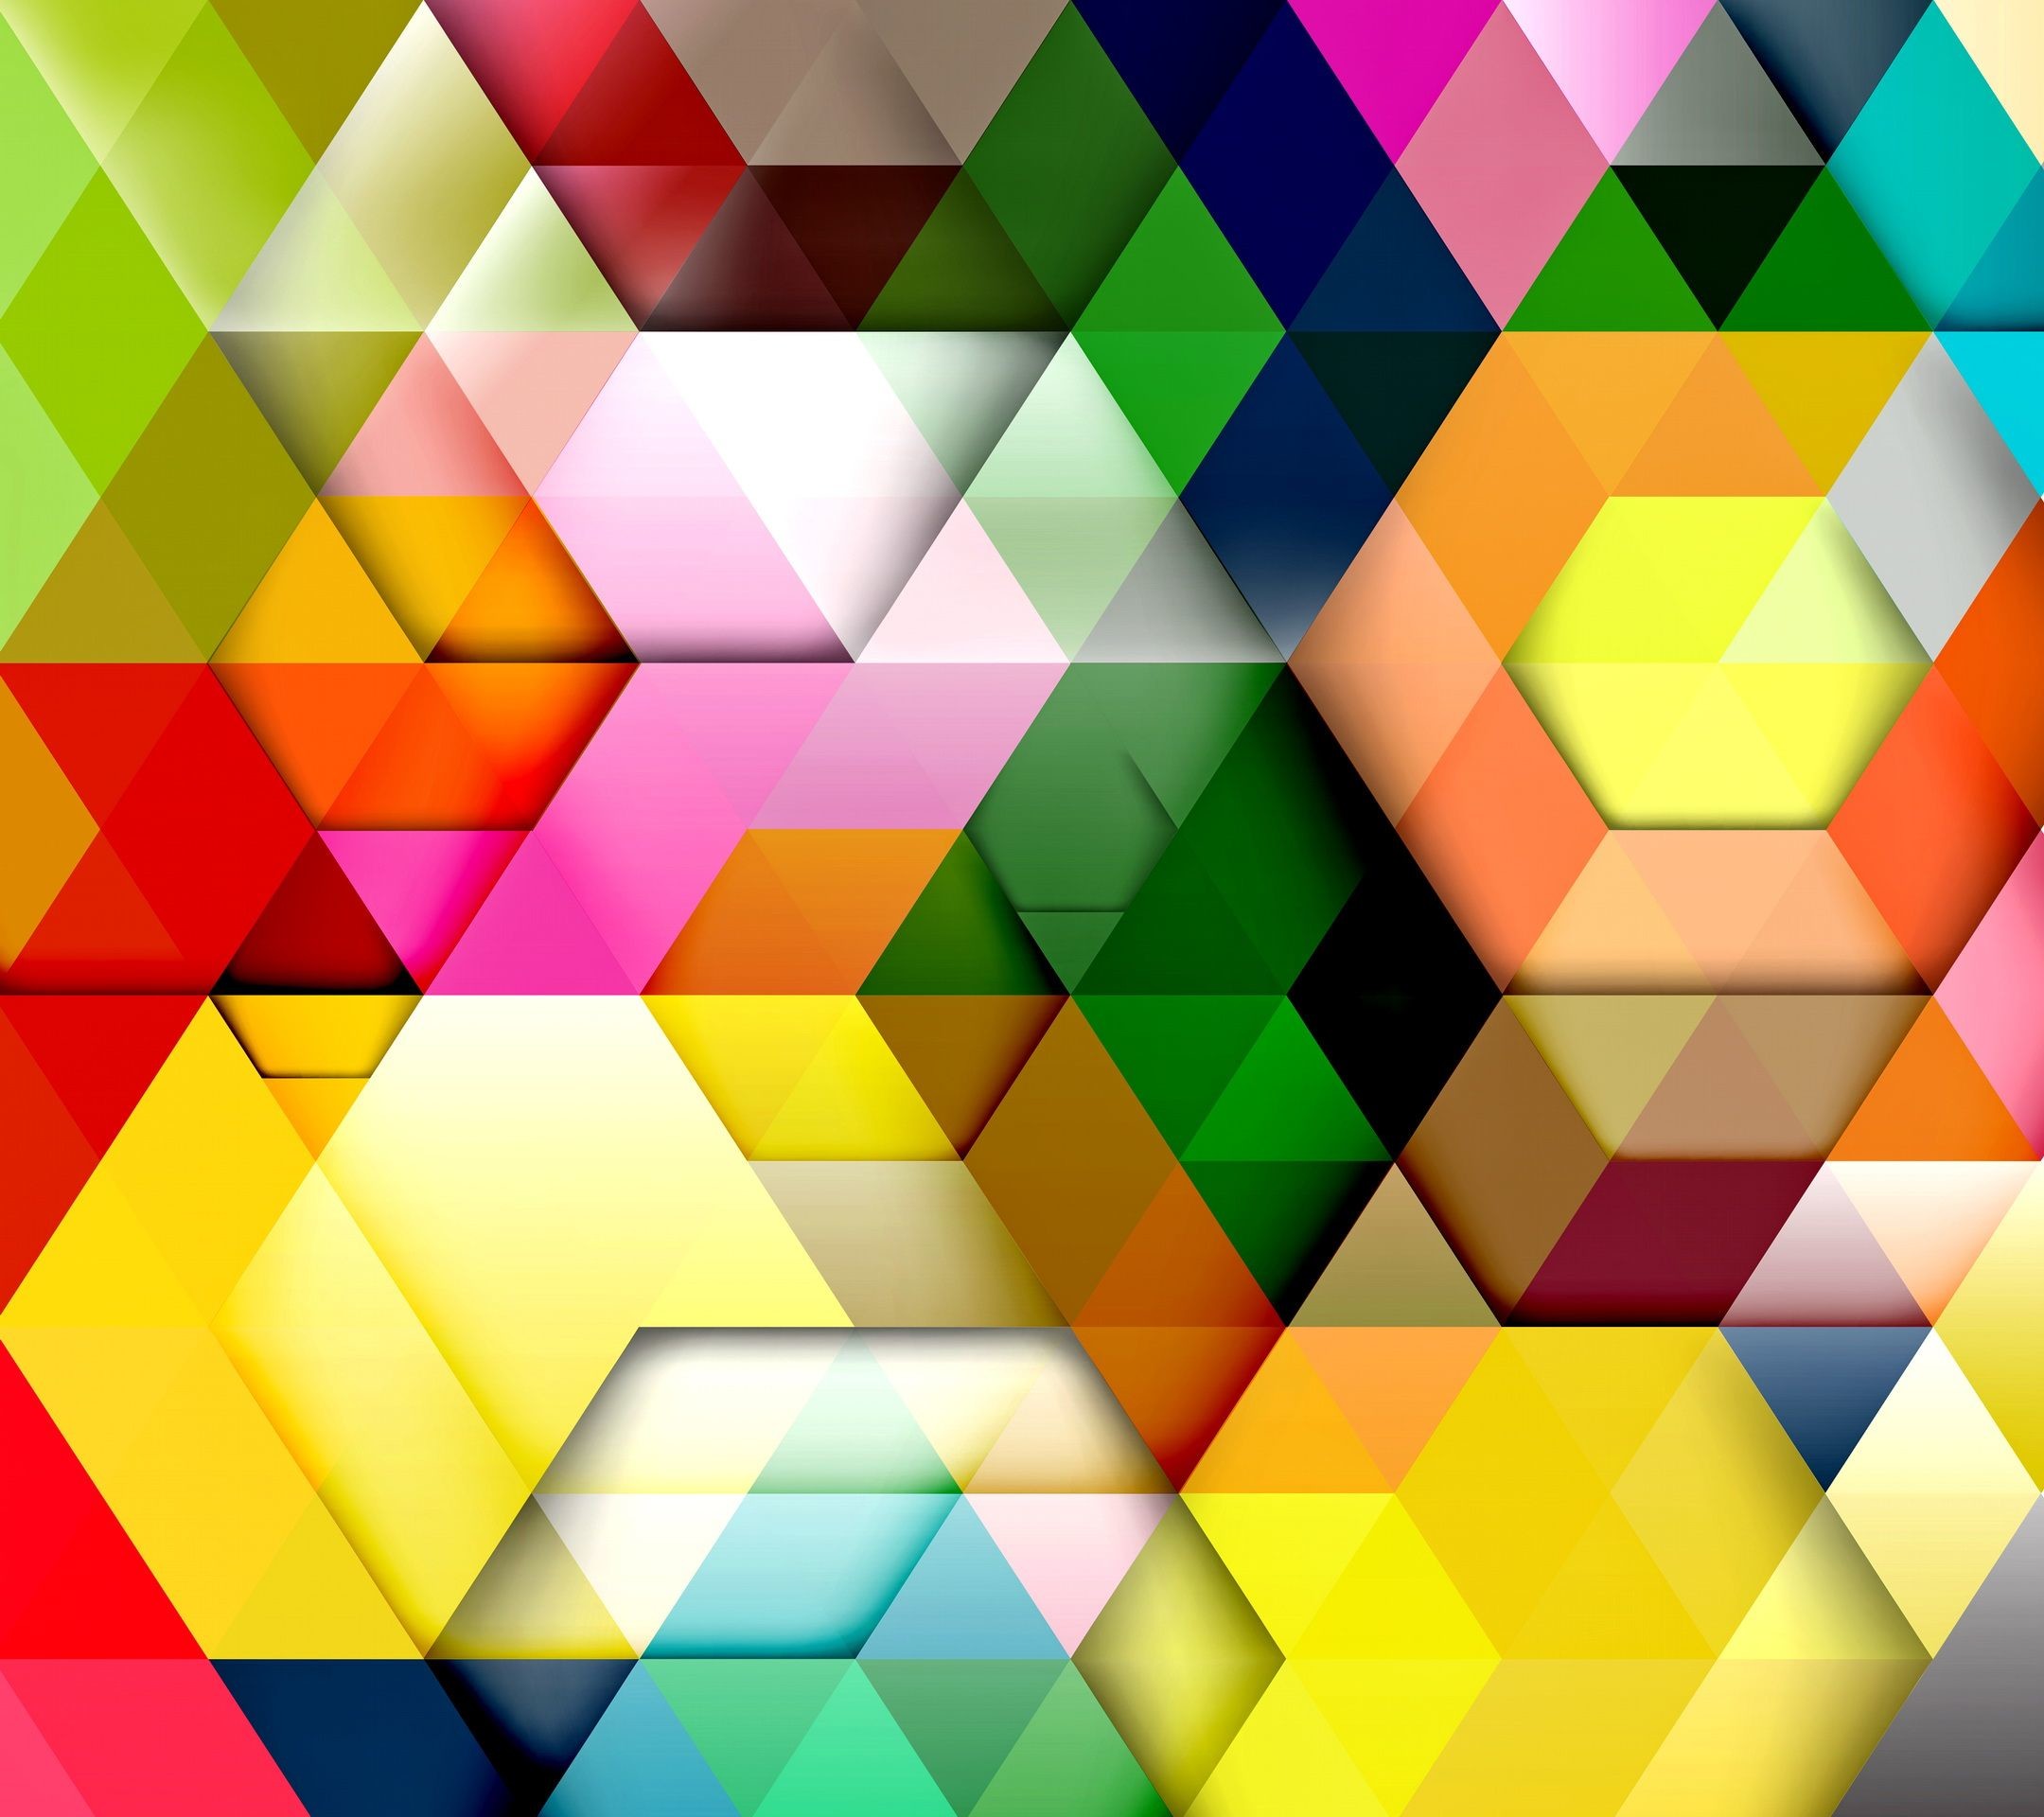 2160x1920, Colorful Abstract - Colorful Geometric Abstract - HD Wallpaper 